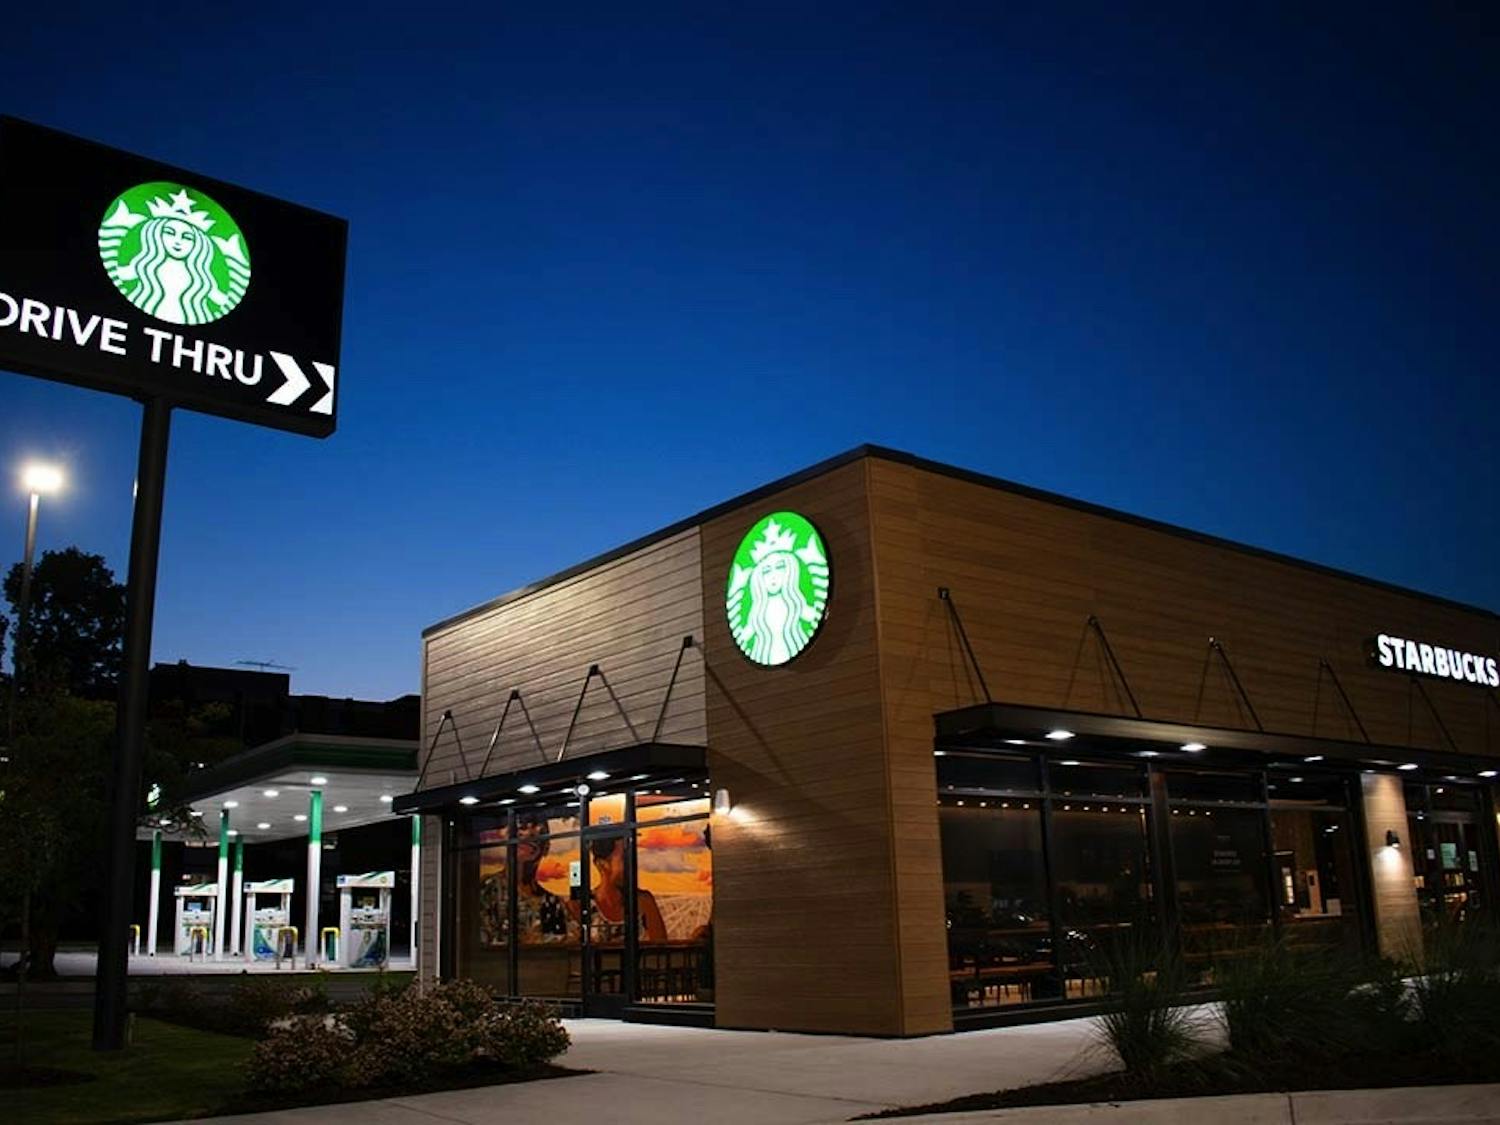 The new community-oriented Starbucks, with Lauren Andreu and Jared Owens’s mural, “A Great Cloud of Witness” visible from inside. This location near campus is more centered around local outreach and creating opportunities than generating profits.&nbsp;